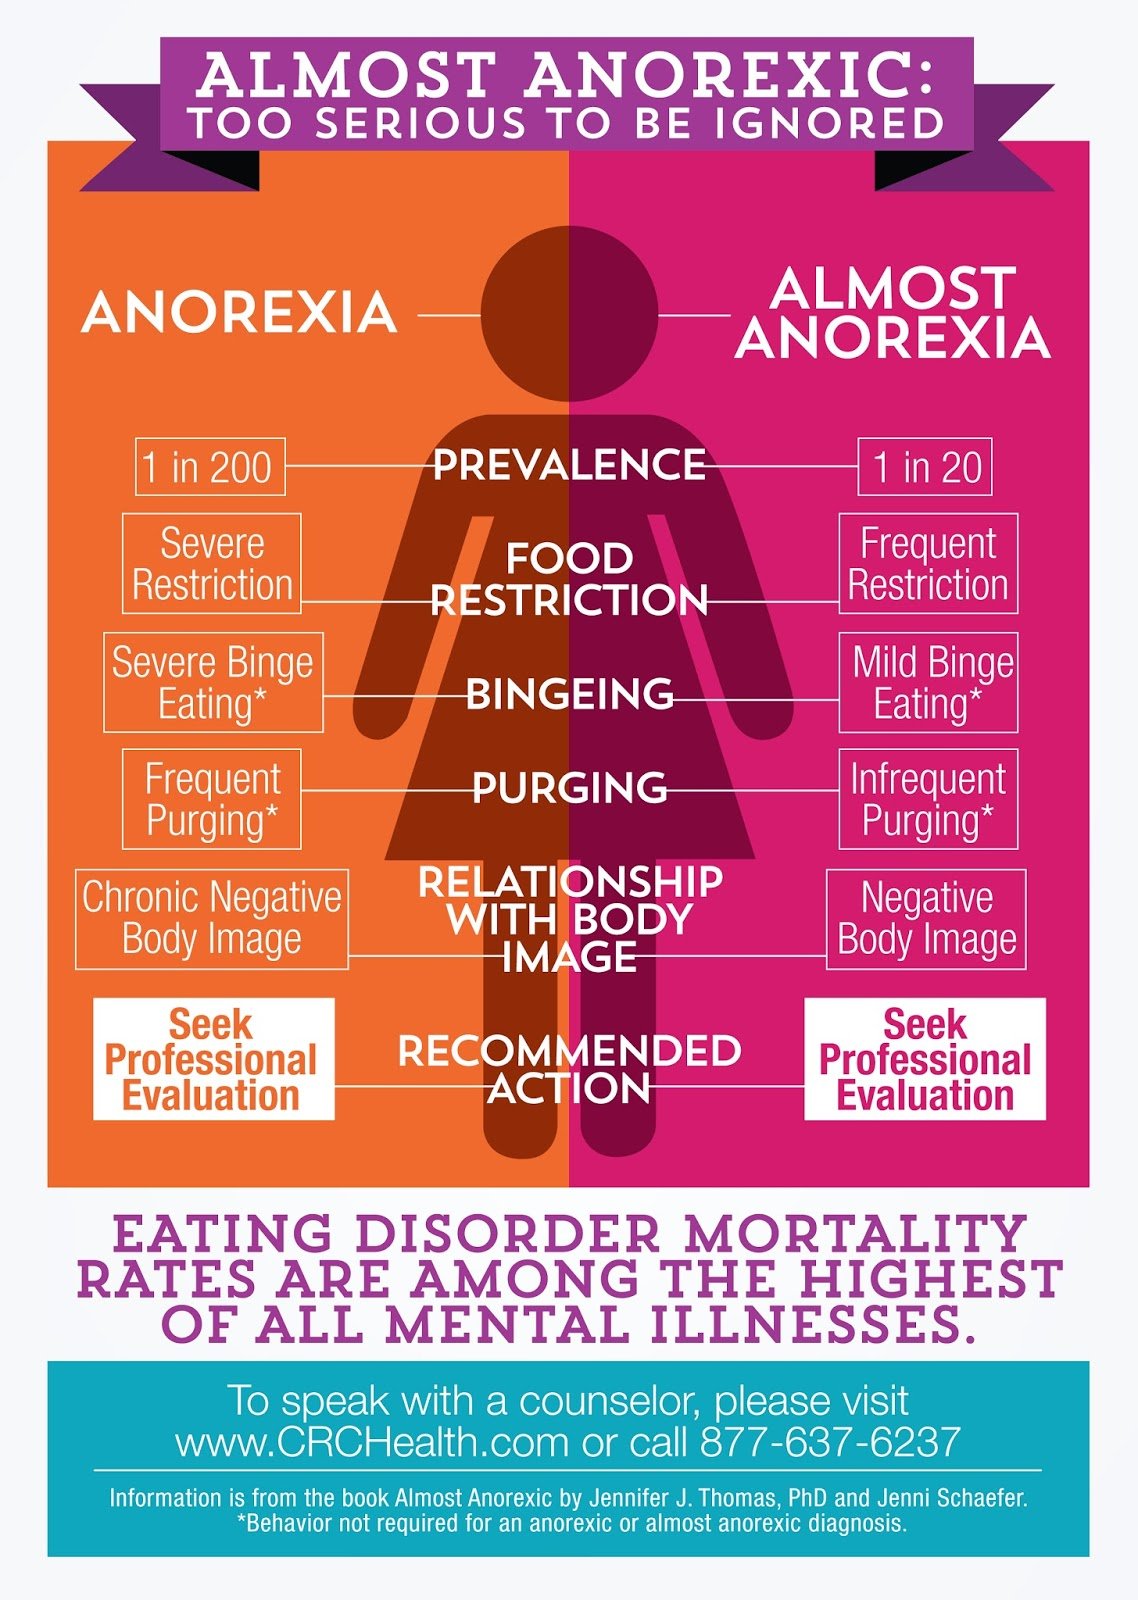 Fighting Anorexia: Get help before its too late